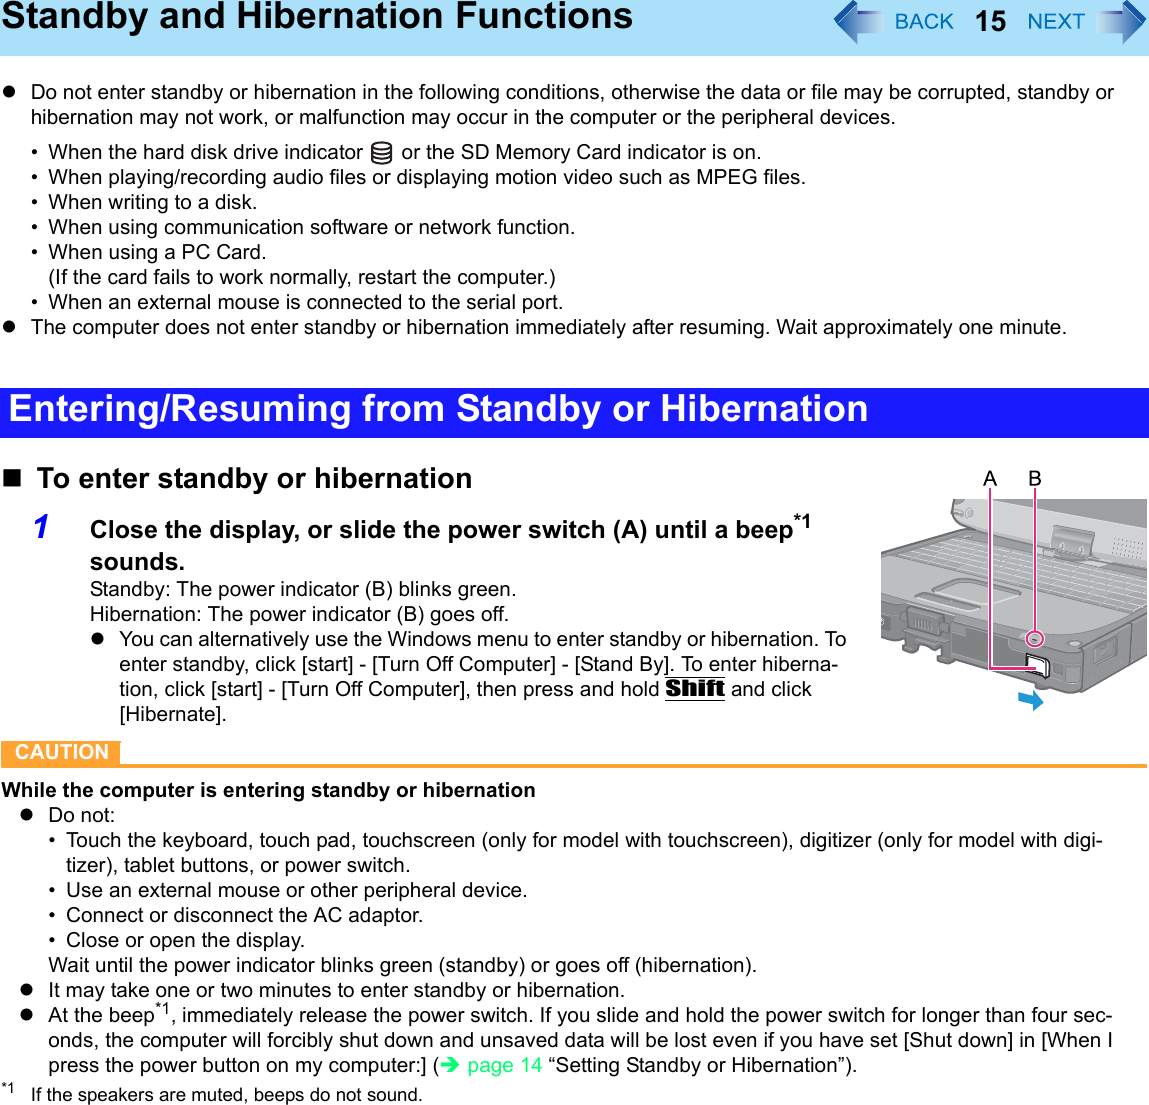 15Standby and Hibernation FunctionszDo not enter standby or hibernation in the following conditions, otherwise the data or file may be corrupted, standby or hibernation may not work, or malfunction may occur in the computer or the peripheral devices.• When the hard disk drive indicator   or the SD Memory Card indicator is on.• When playing/recording audio files or displaying motion video such as MPEG files.• When writing to a disk.• When using communication software or network function.• When using a PC Card.(If the card fails to work normally, restart the computer.)• When an external mouse is connected to the serial port.zThe computer does not enter standby or hibernation immediately after resuming. Wait approximately one minute.To enter standby or hibernation1Close the display, or slide the power switch (A) until a beep*1 sounds.Standby: The power indicator (B) blinks green.Hibernation: The power indicator (B) goes off.zYou can alternatively use the Windows menu to enter standby or hibernation. To enter standby, click [start] - [Turn Off Computer] - [Stand By]. To enter hiberna-tion, click [start] - [Turn Off Computer], then press and hold Shift and click [Hibernate].CAUTIONWhile the computer is entering standby or hibernationzDo not:• Touch the keyboard, touch pad, touchscreen (only for model with touchscreen), digitizer (only for model with digi-tizer), tablet buttons, or power switch.• Use an external mouse or other peripheral device.• Connect or disconnect the AC adaptor.• Close or open the display.Wait until the power indicator blinks green (standby) or goes off (hibernation).zIt may take one or two minutes to enter standby or hibernation. zAt the beep*1, immediately release the power switch. If you slide and hold the power switch for longer than four sec-onds, the computer will forcibly shut down and unsaved data will be lost even if you have set [Shut down] in [When I press the power button on my computer:] (Îpage 14 “Setting Standby or Hibernation”).*1 If the speakers are muted, beeps do not sound.Entering/Resuming from Standby or Hibernation